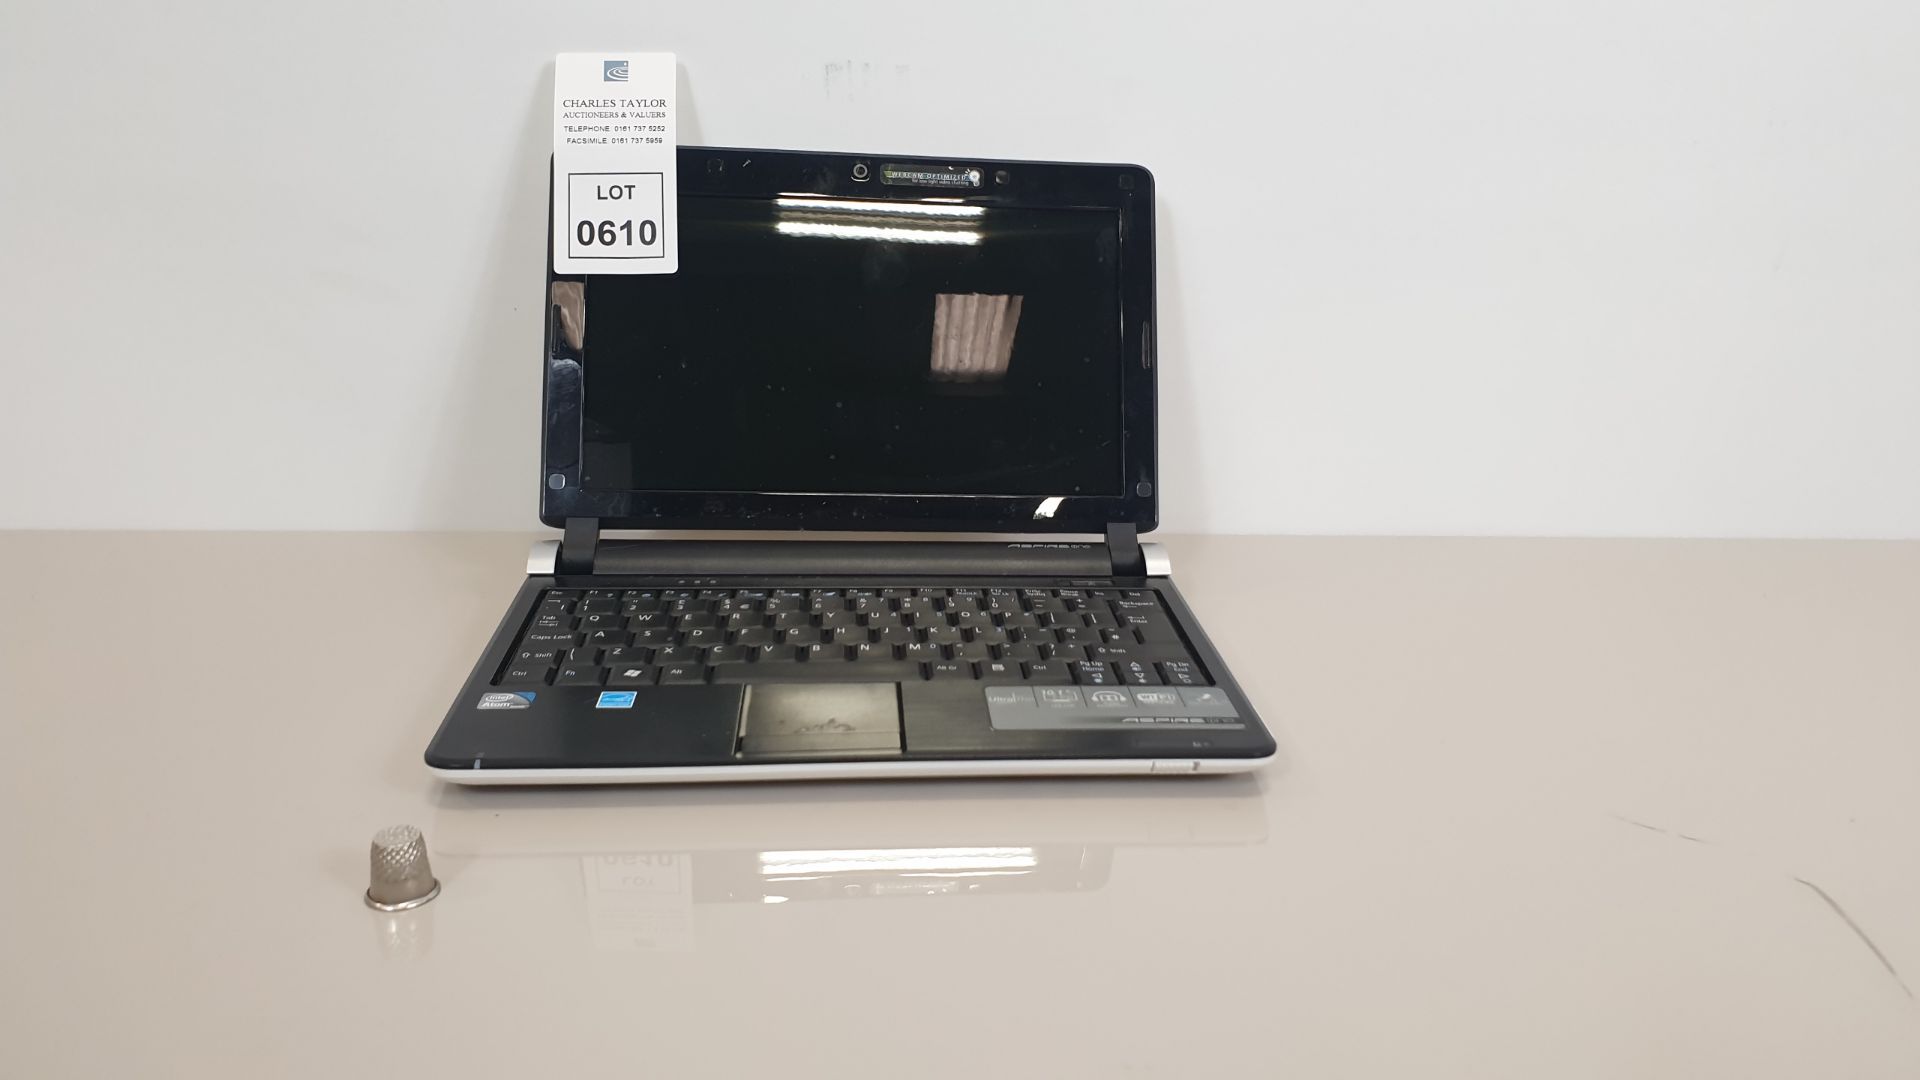 ULTRA THIN ACER ASPIRE ONE LAPTOP (MODEL D250 - 0BW) WITH WEBCAM AND CHARGER